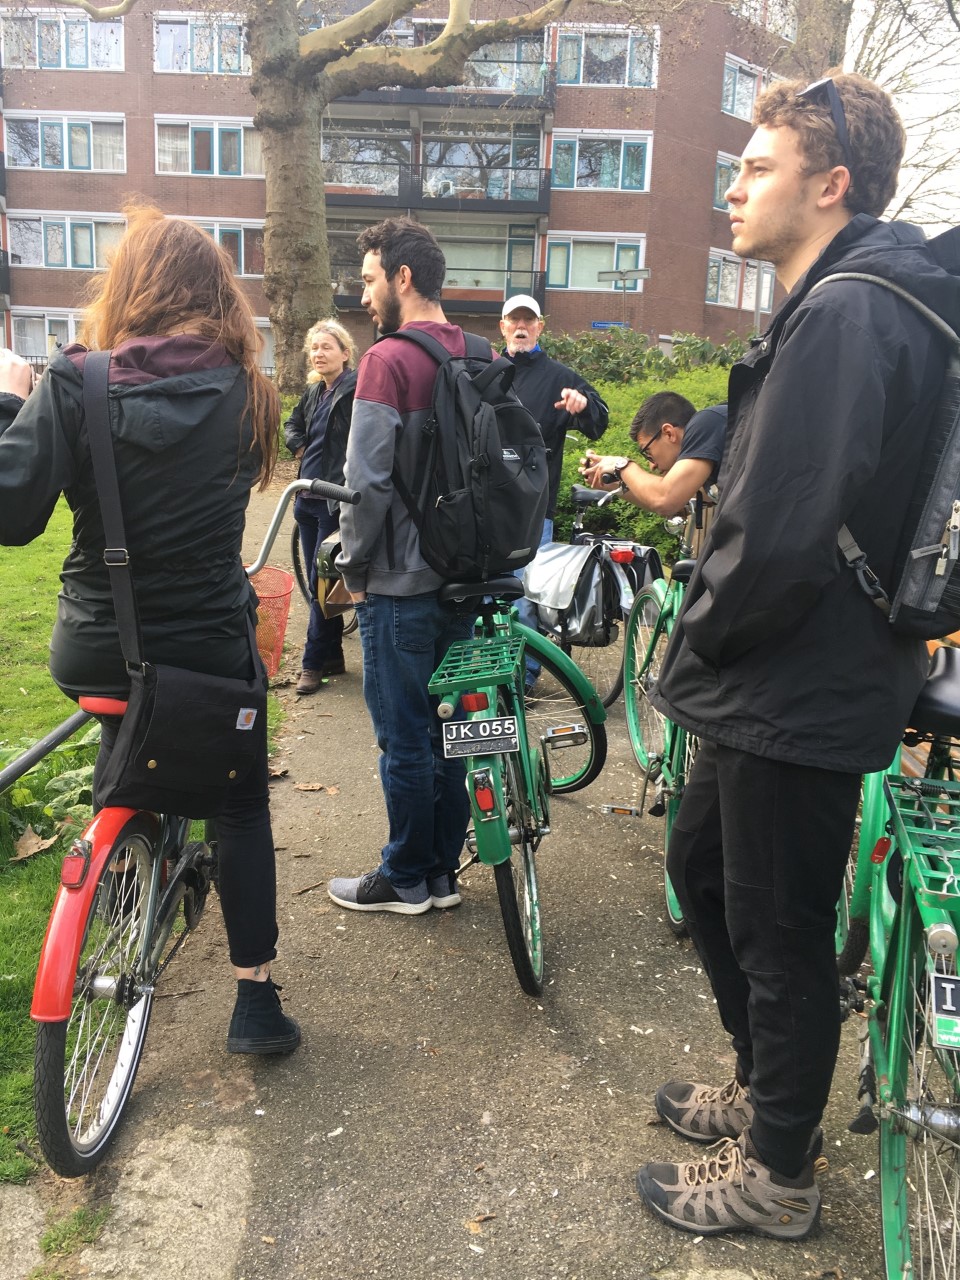 Students standing with bicycles.